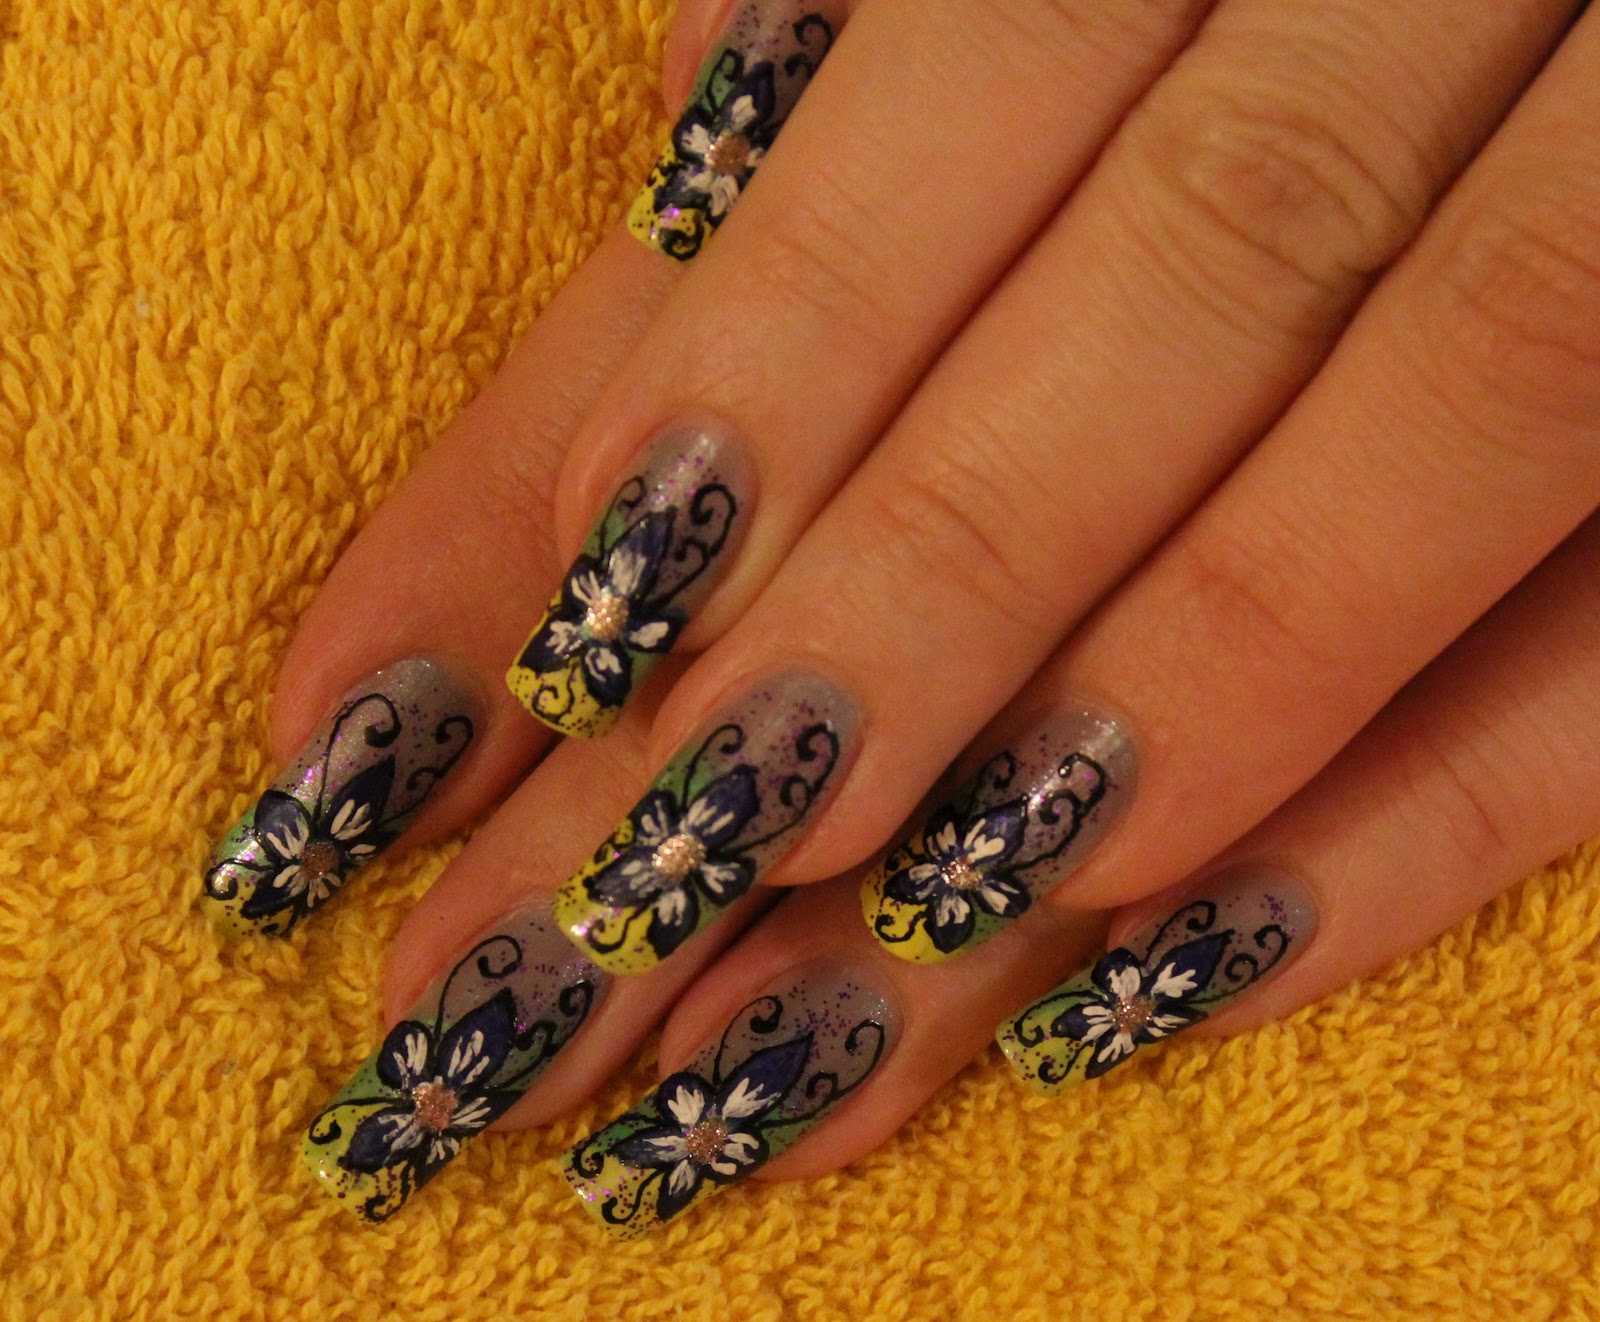 1. Blue and White Floral Nail Design - wide 7